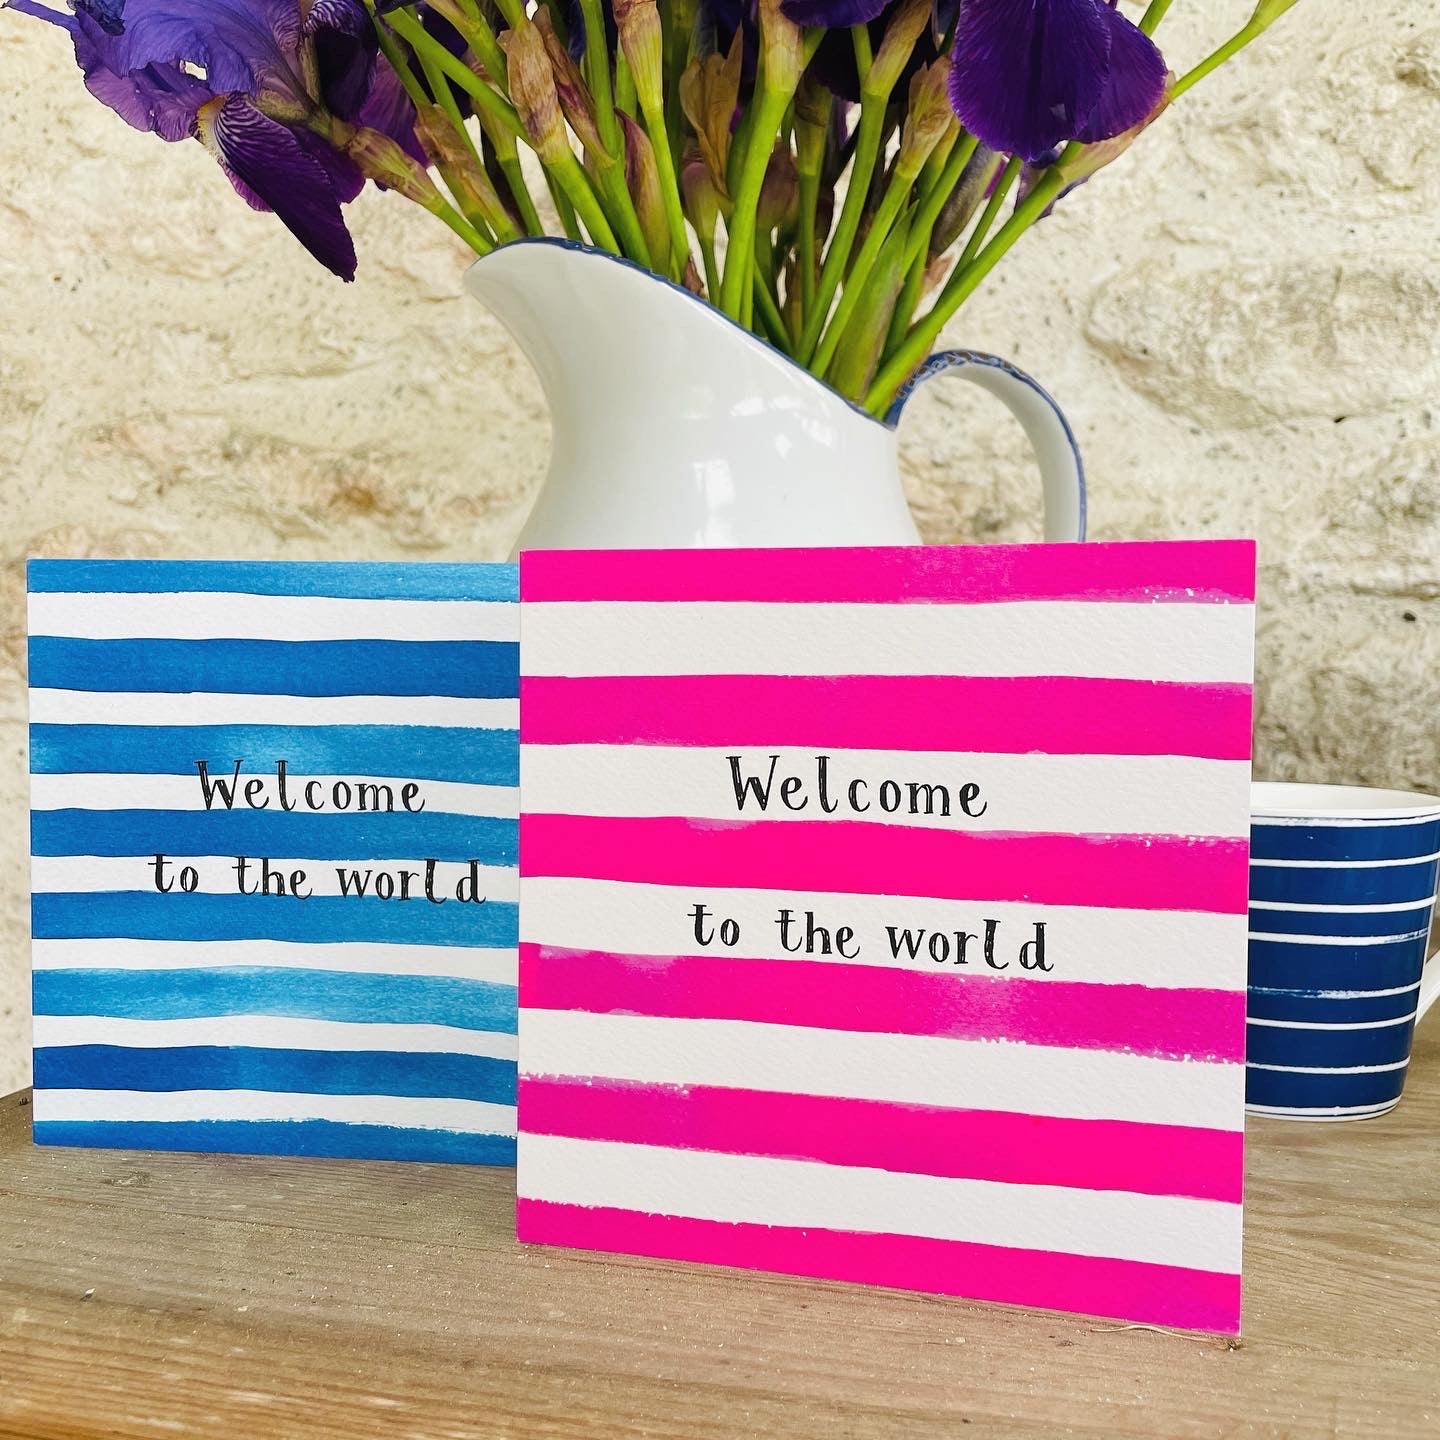 K25 Welcome to the World, Blue Stripes Greetings Card